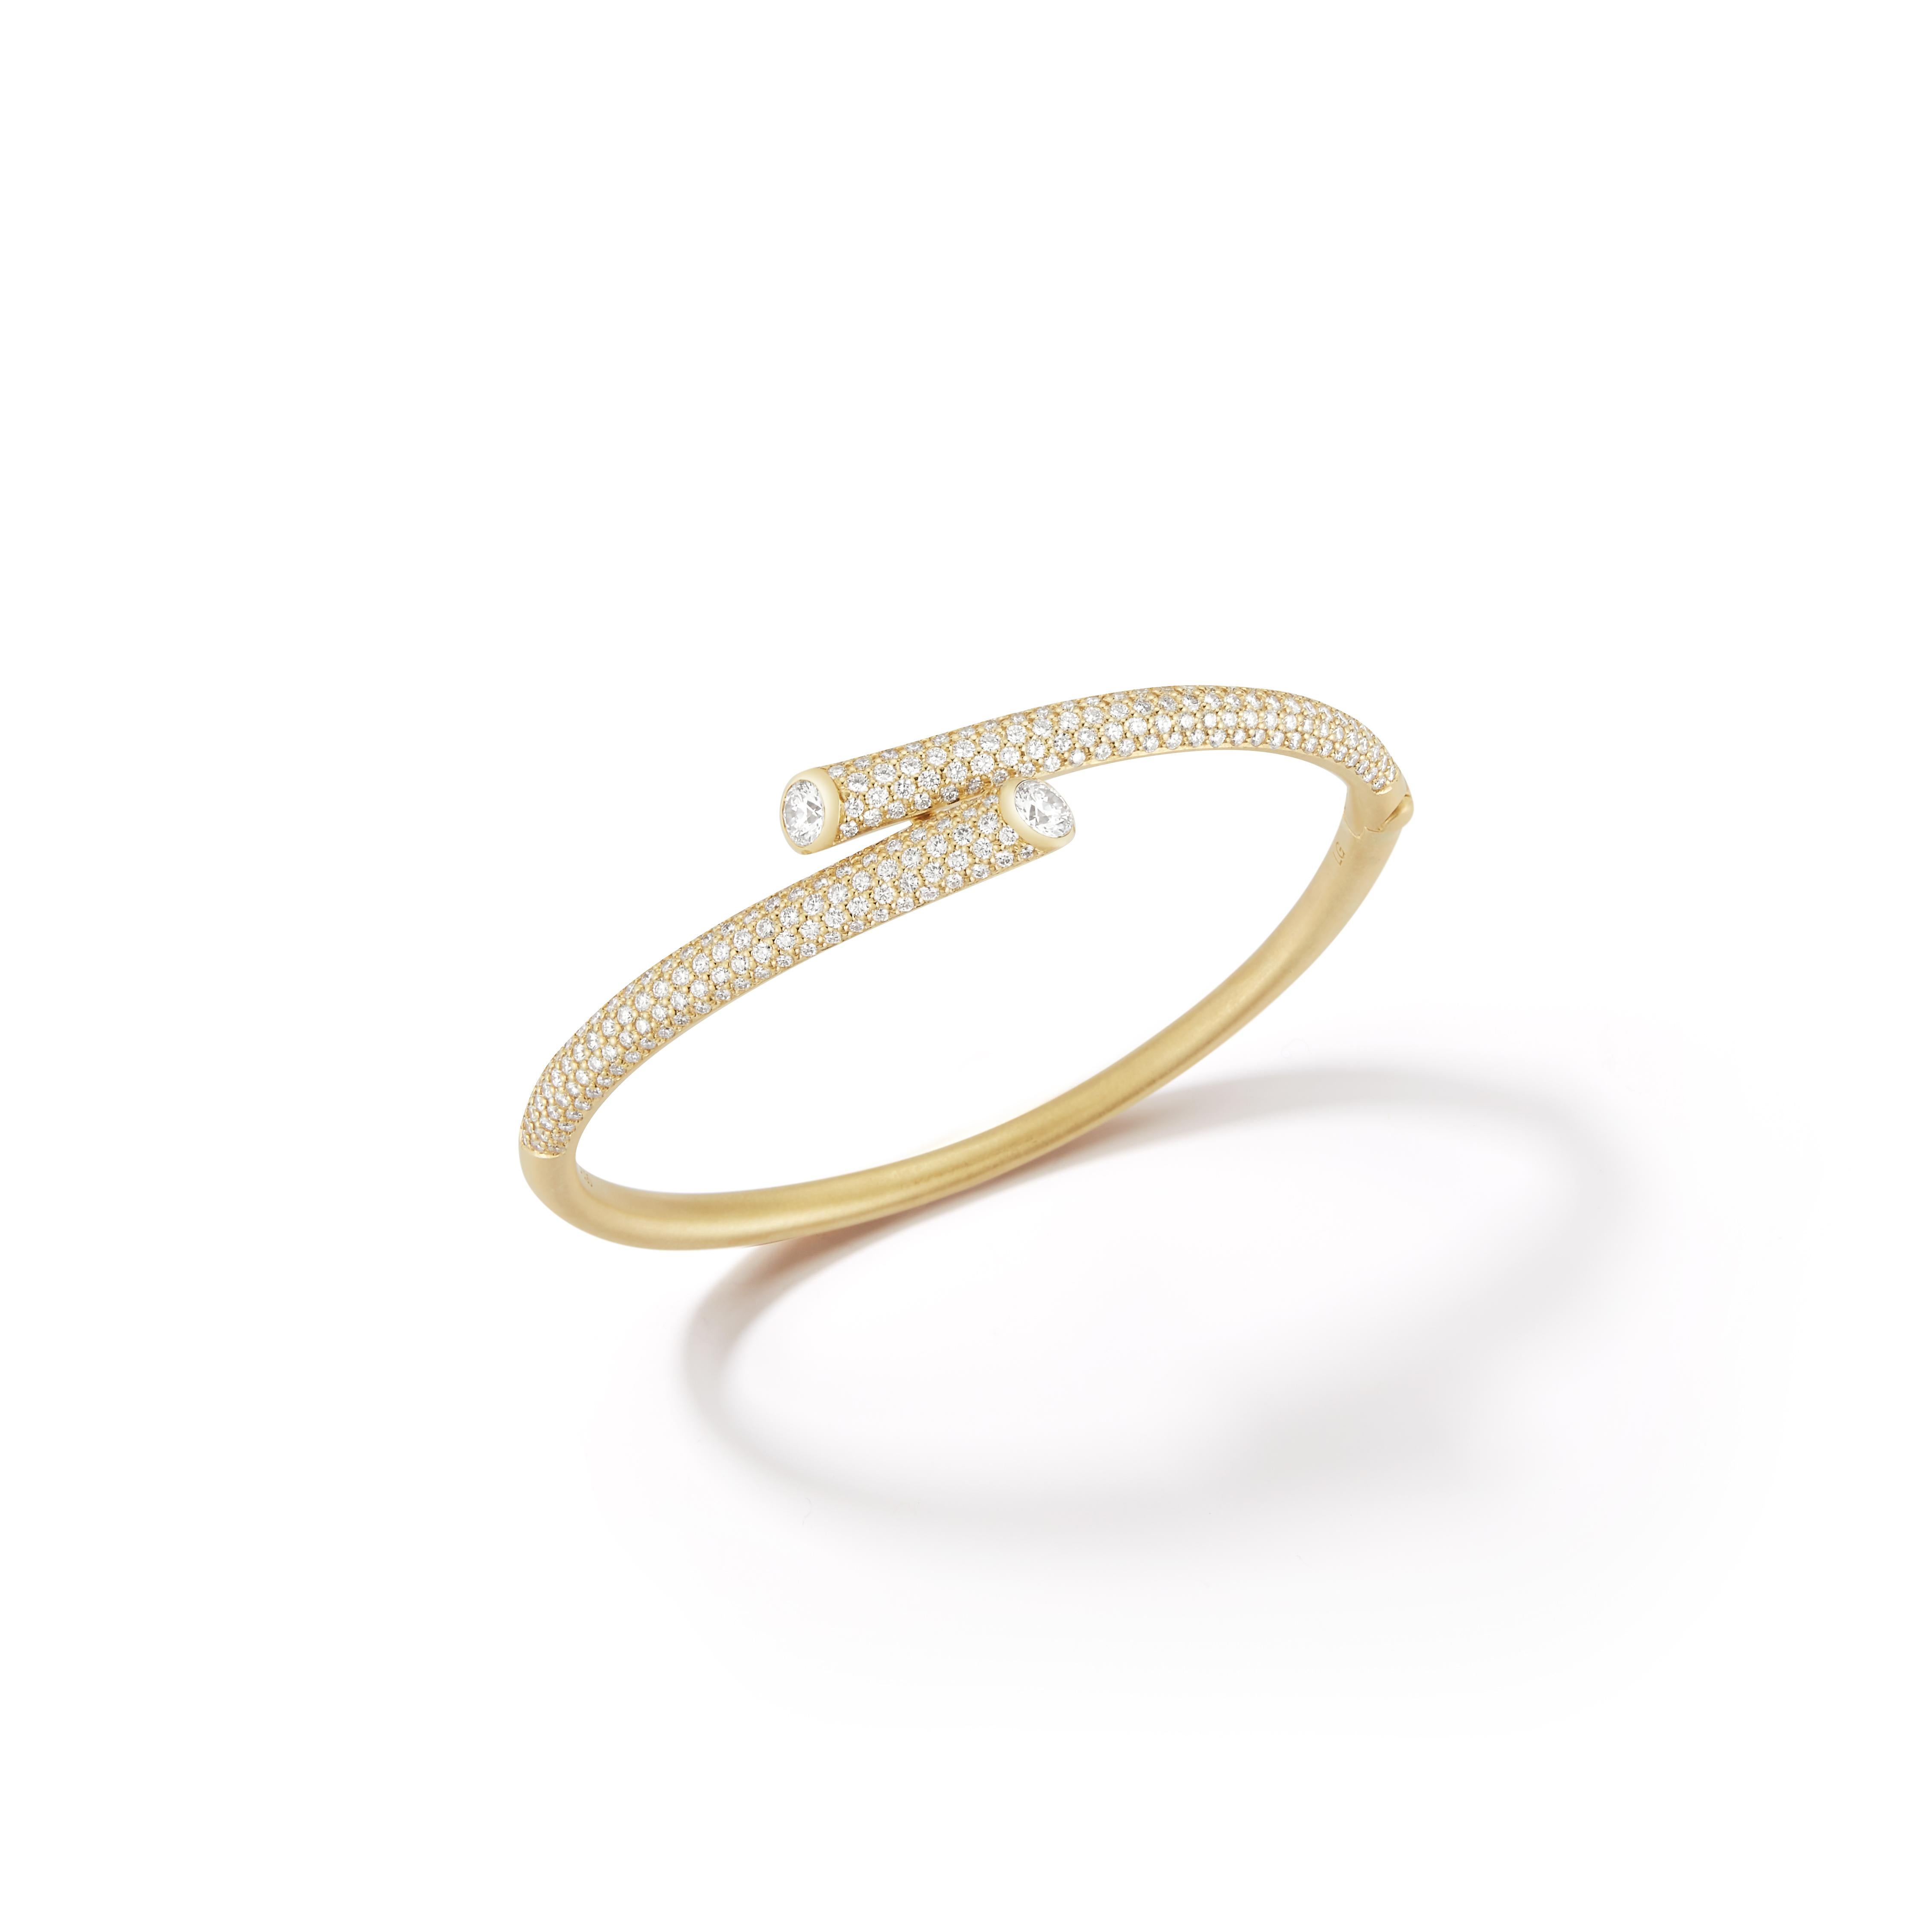 Carelle Whirl transforms the City’s energy and rhythm into chic essentials designed to navigate everyday twists and turns with an elevated sense of style and sophistication.

This 18 karat yellow gold bracelet showcases two diamonds adorned with